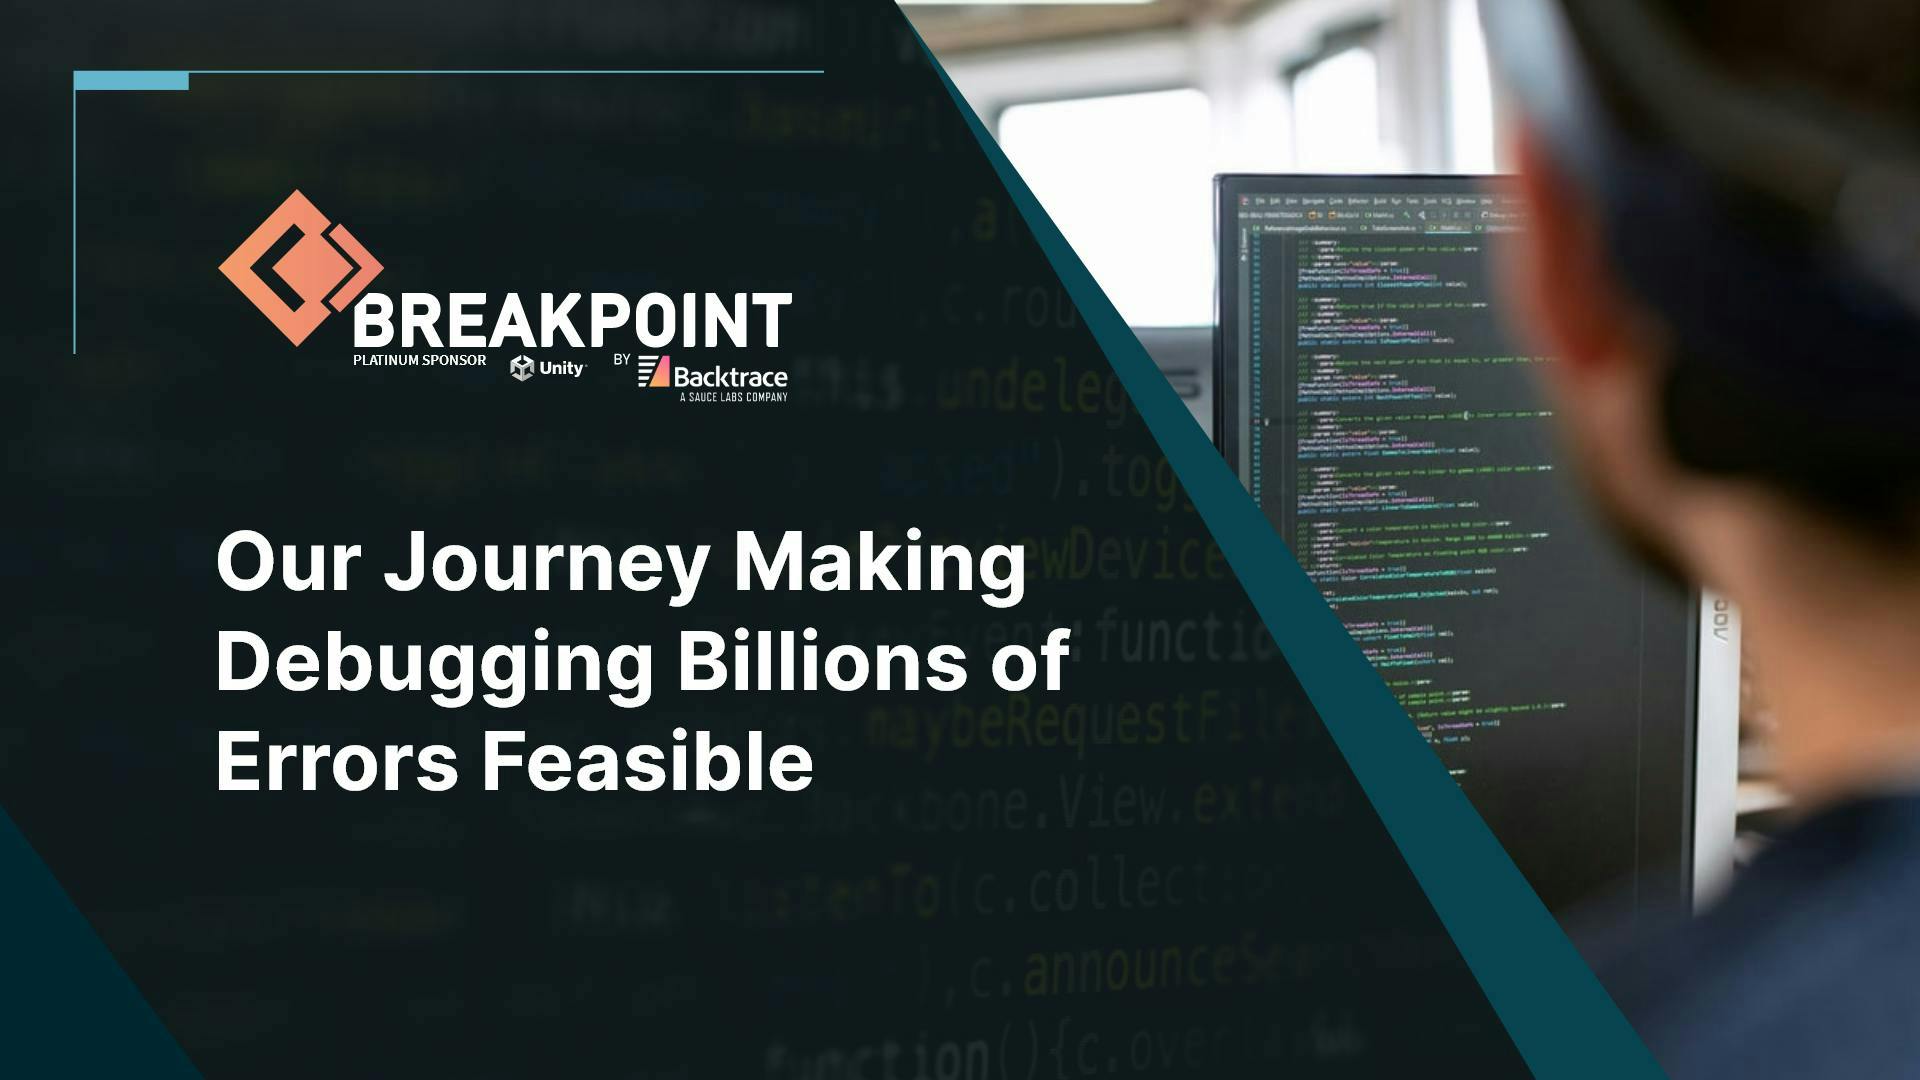 Breakpoint: Our Journey Making Debugging Billions of Errors Feasible